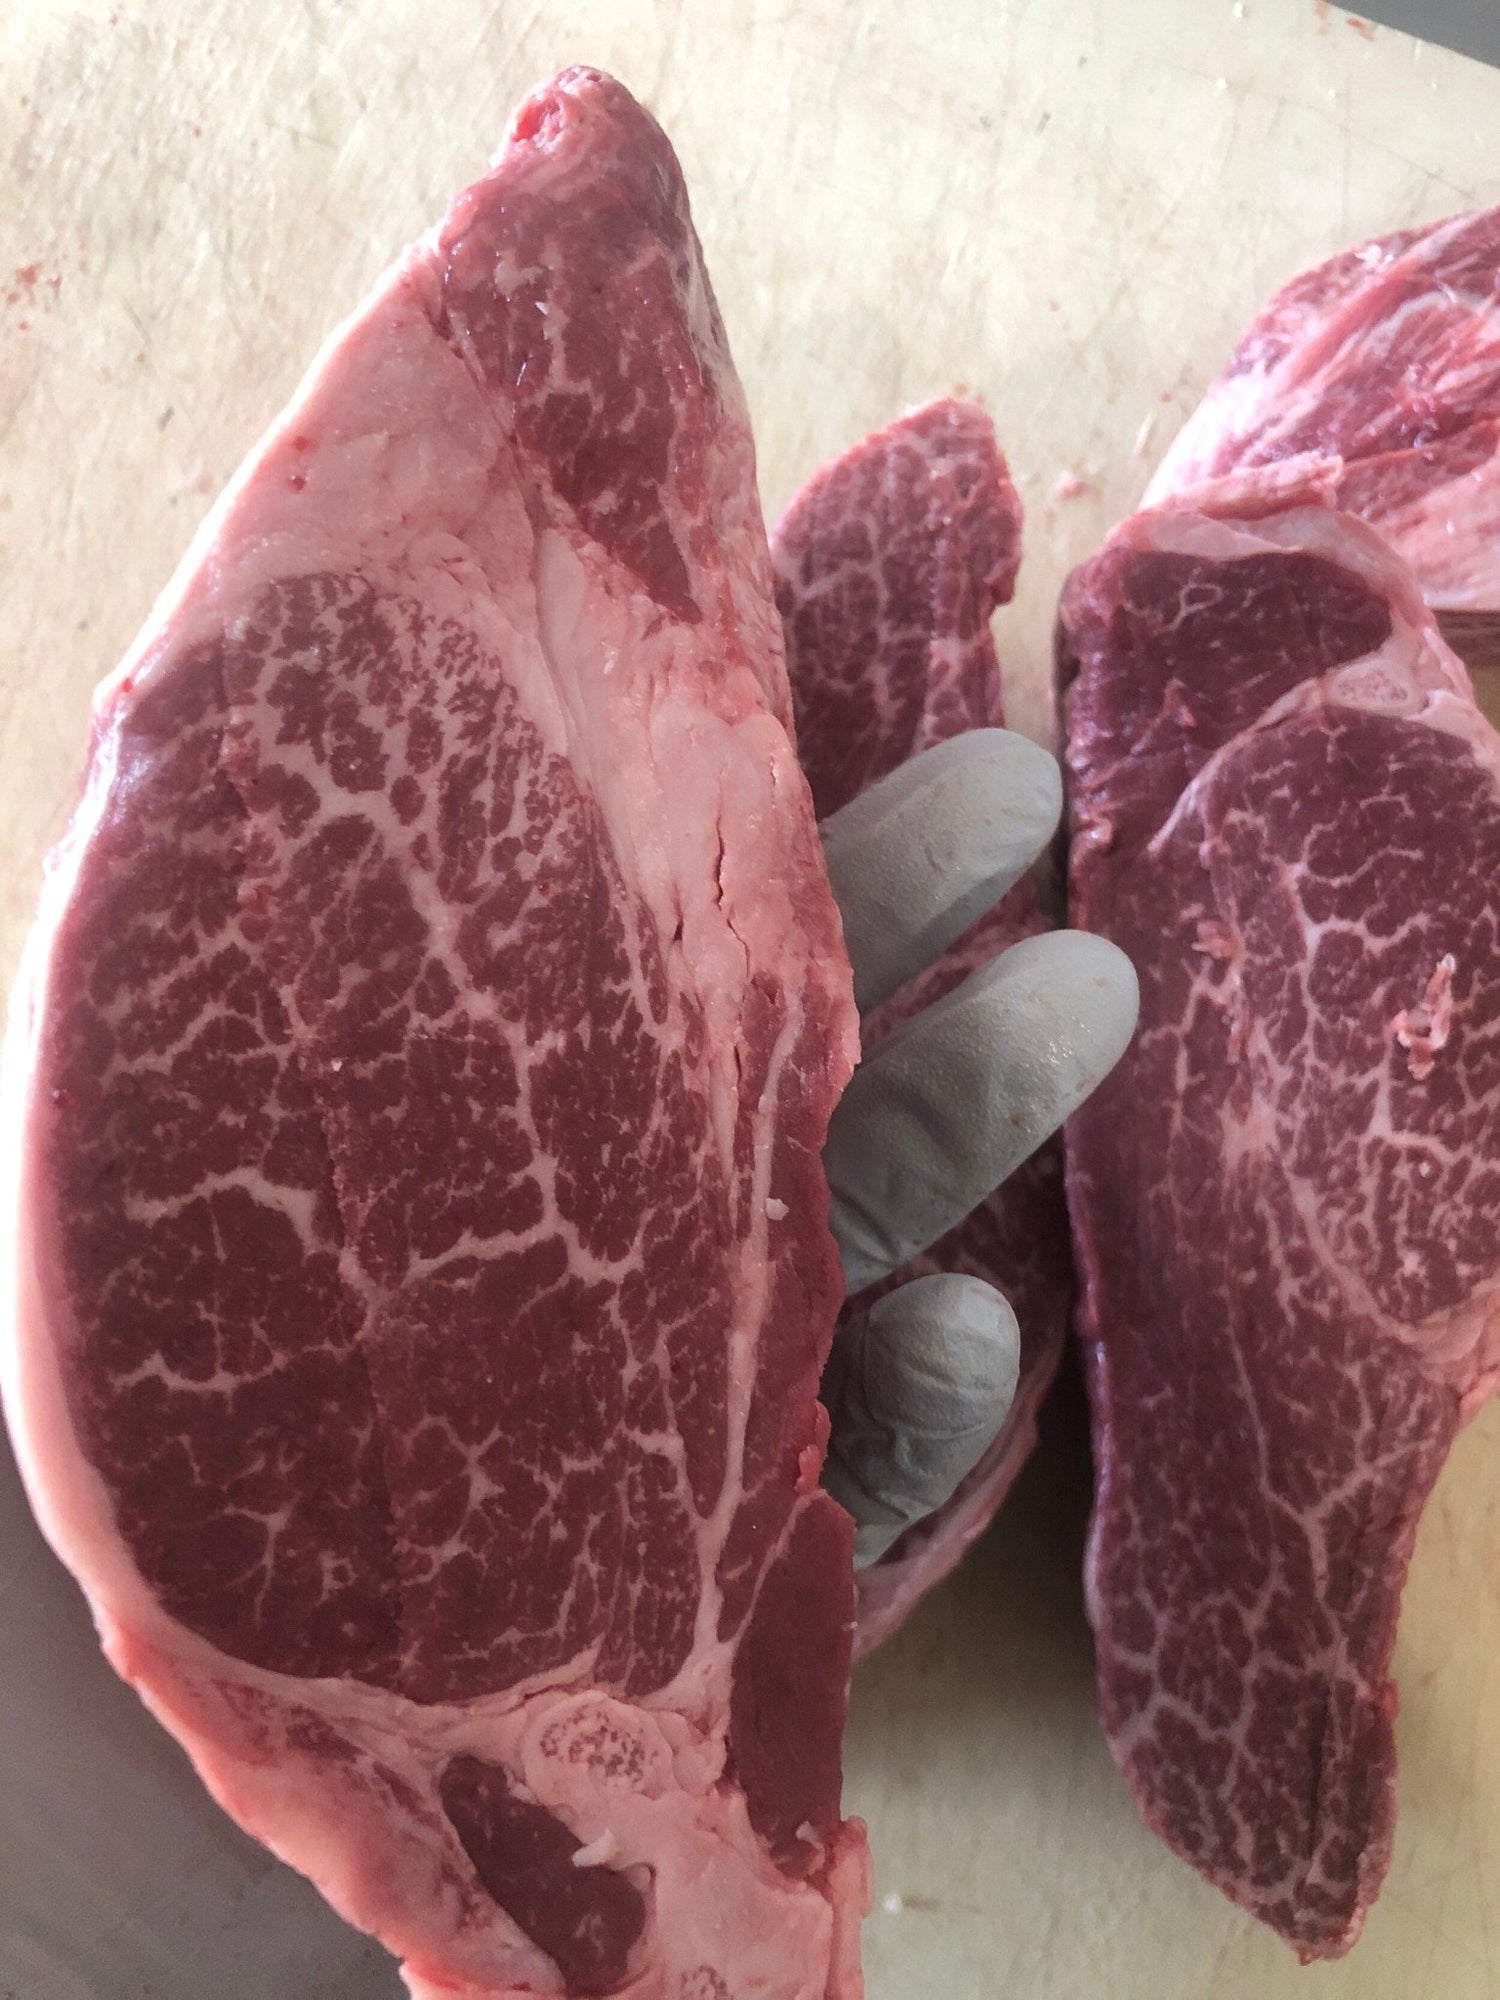 Brand New: NOT A5 Japanese A3 - Ribeye or Strip (2 steaks